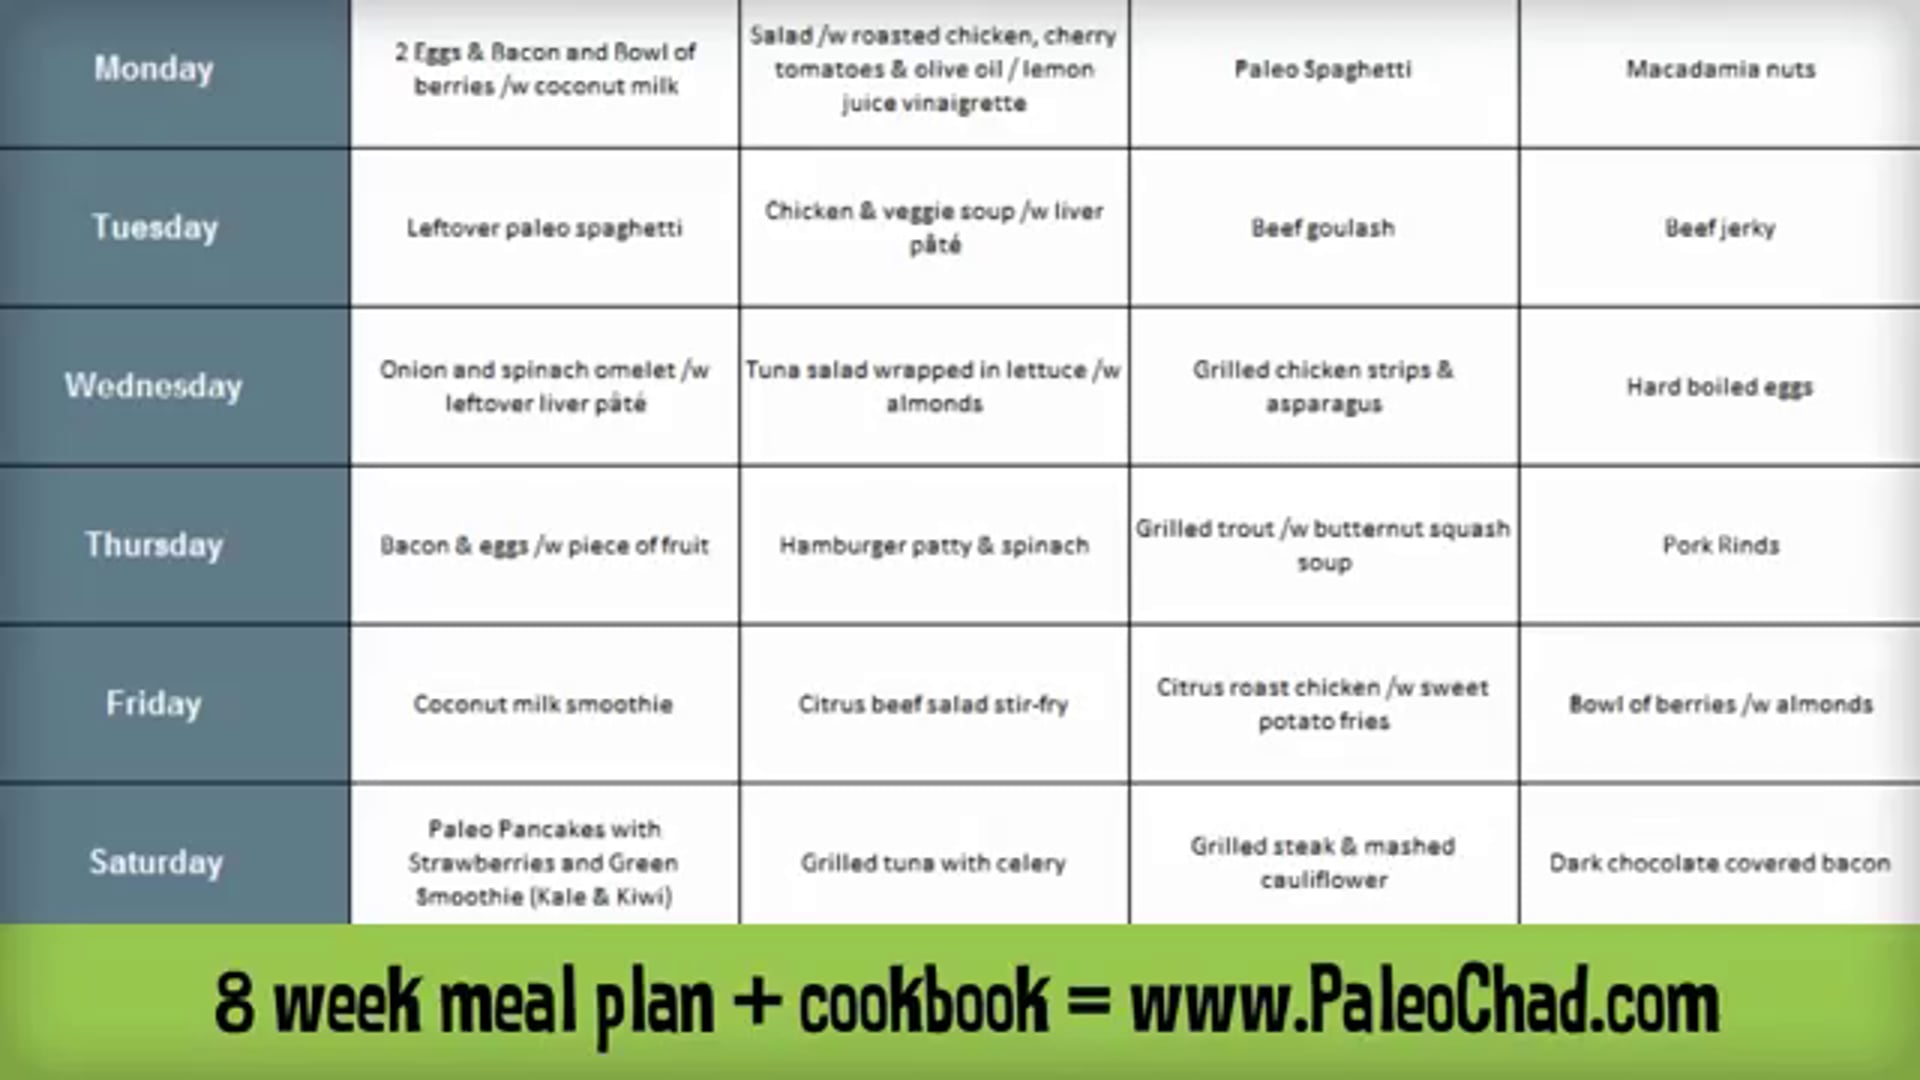 Ultimate Paleo Diet Meal Plan - 14 Day Meal Plan and Cookbook - Paleolithic Diet